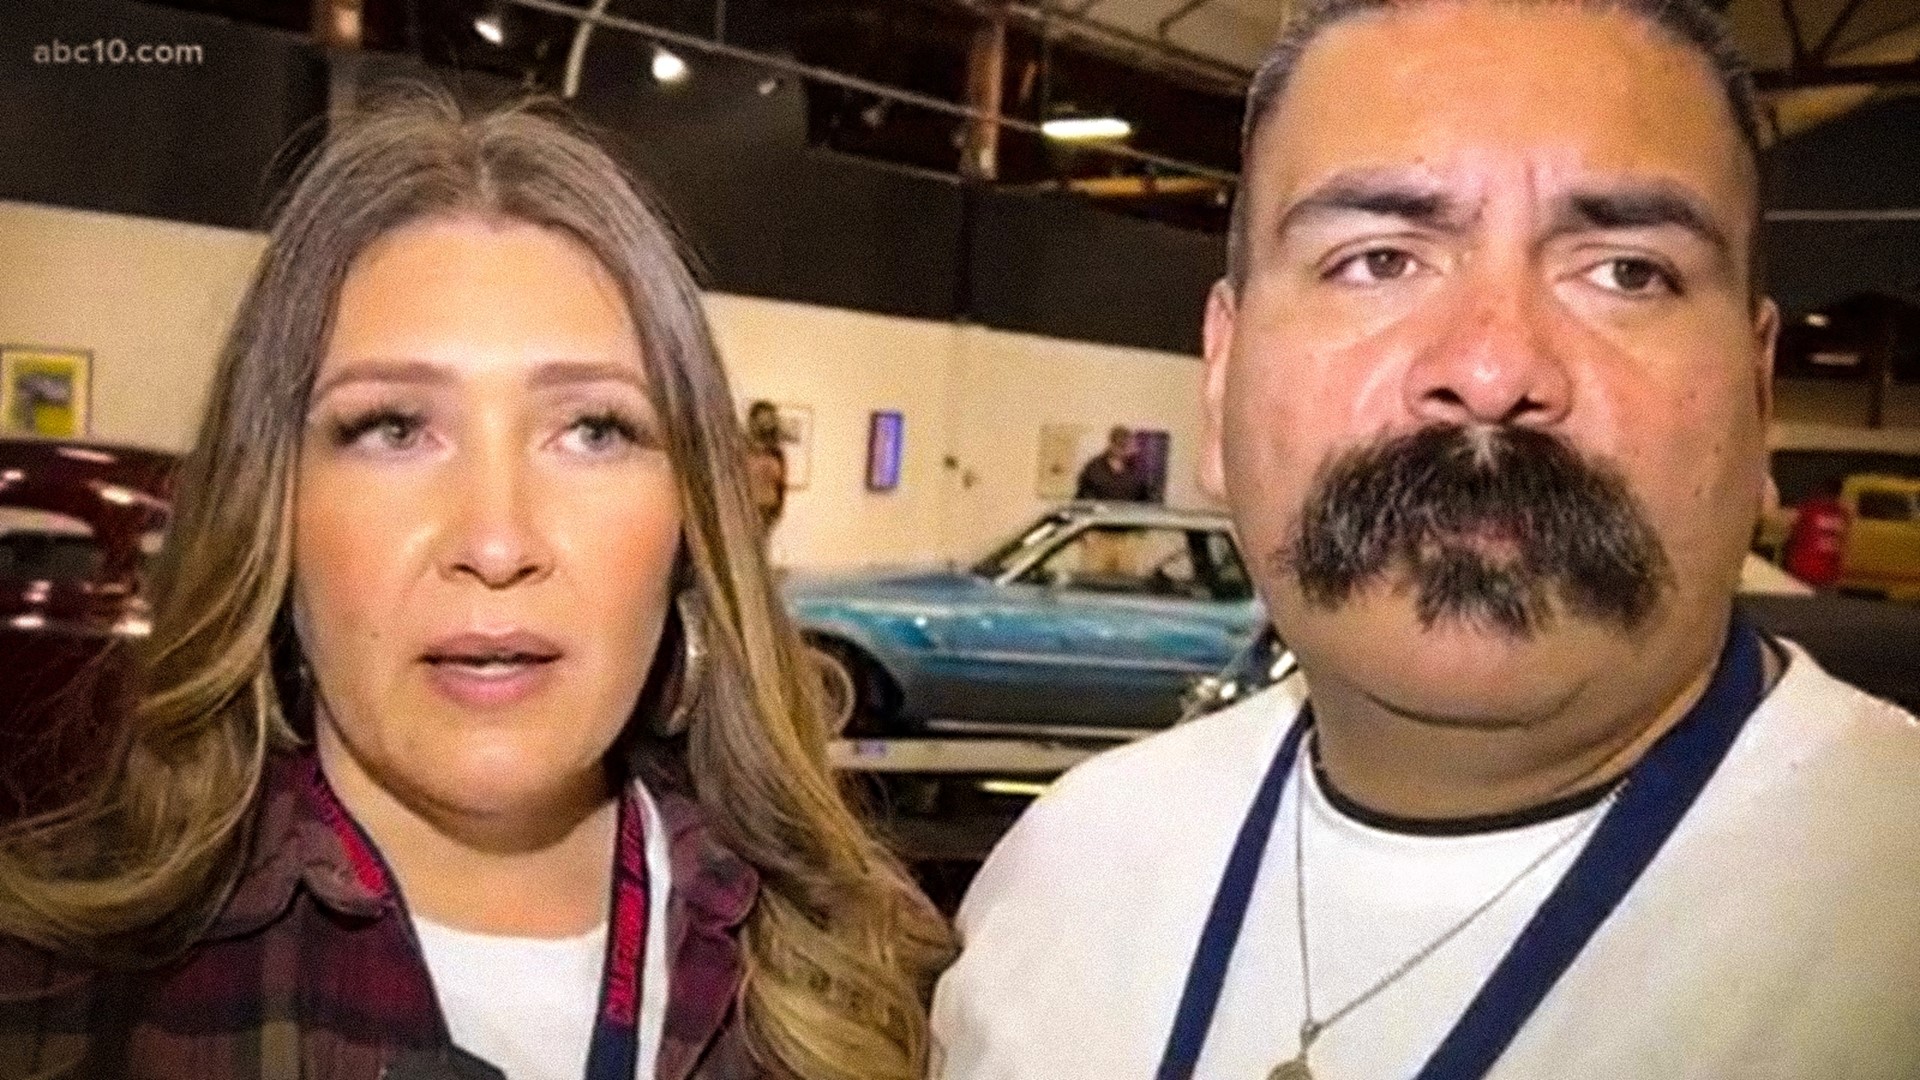 Our Mark S. Allen reports on the culture surrounding low riders on showcase at the California Auto Museum, a collaboration between the community and an art curator.